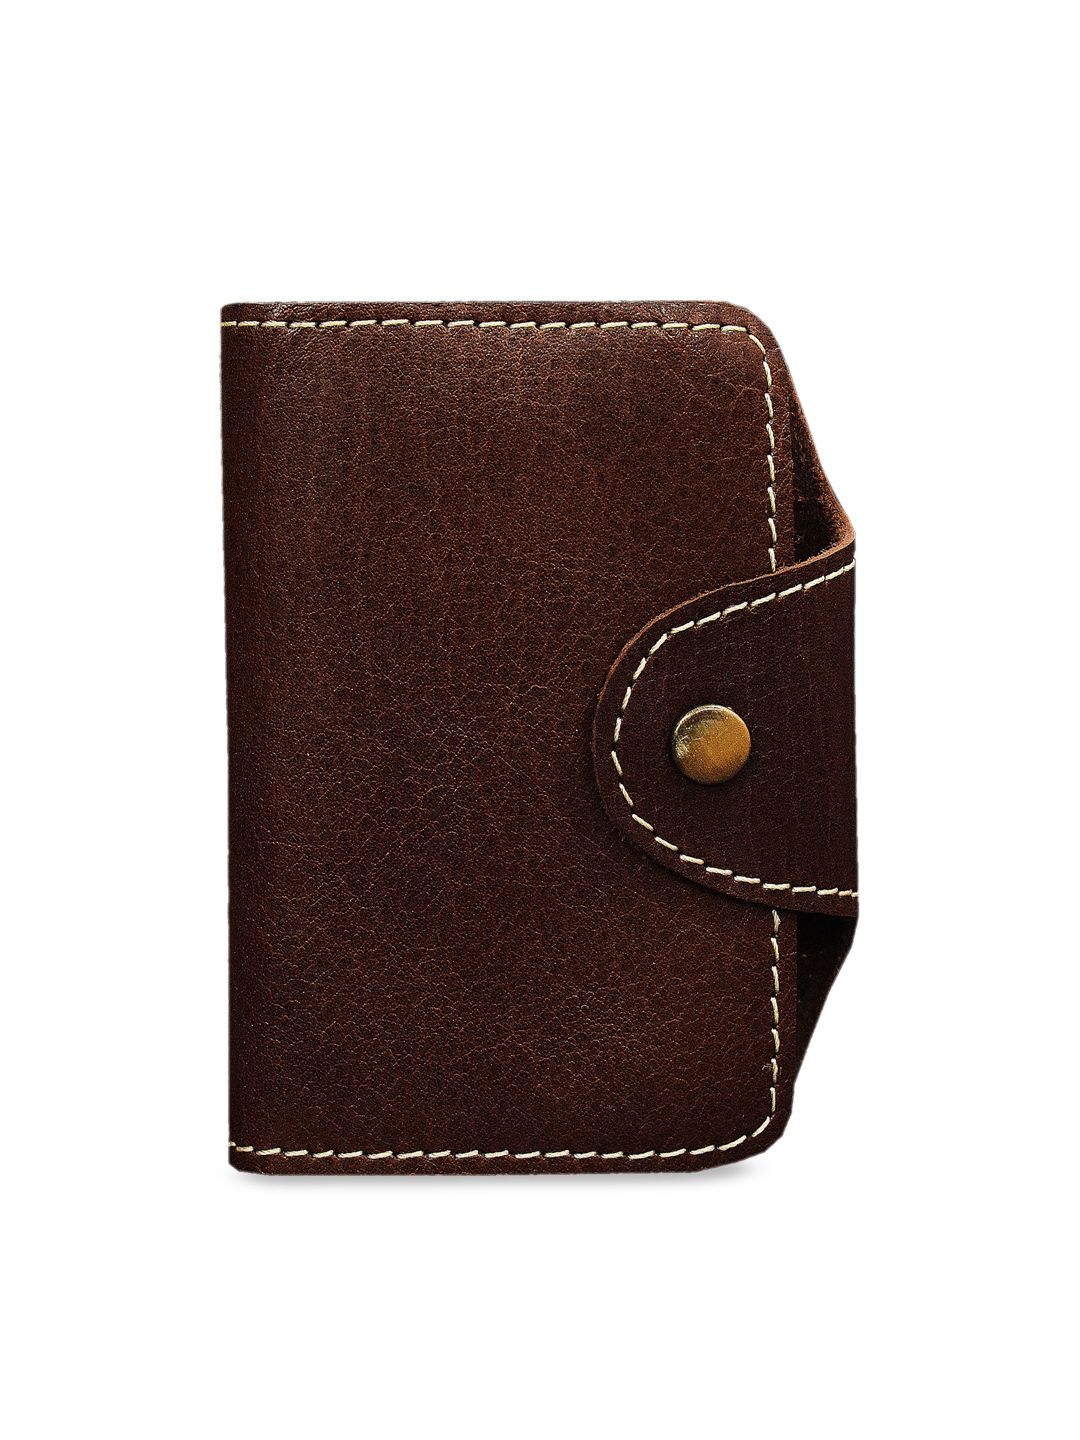 ABYS Unisex Coffee Brown Solid Genuine Leather Card Holder Price in India